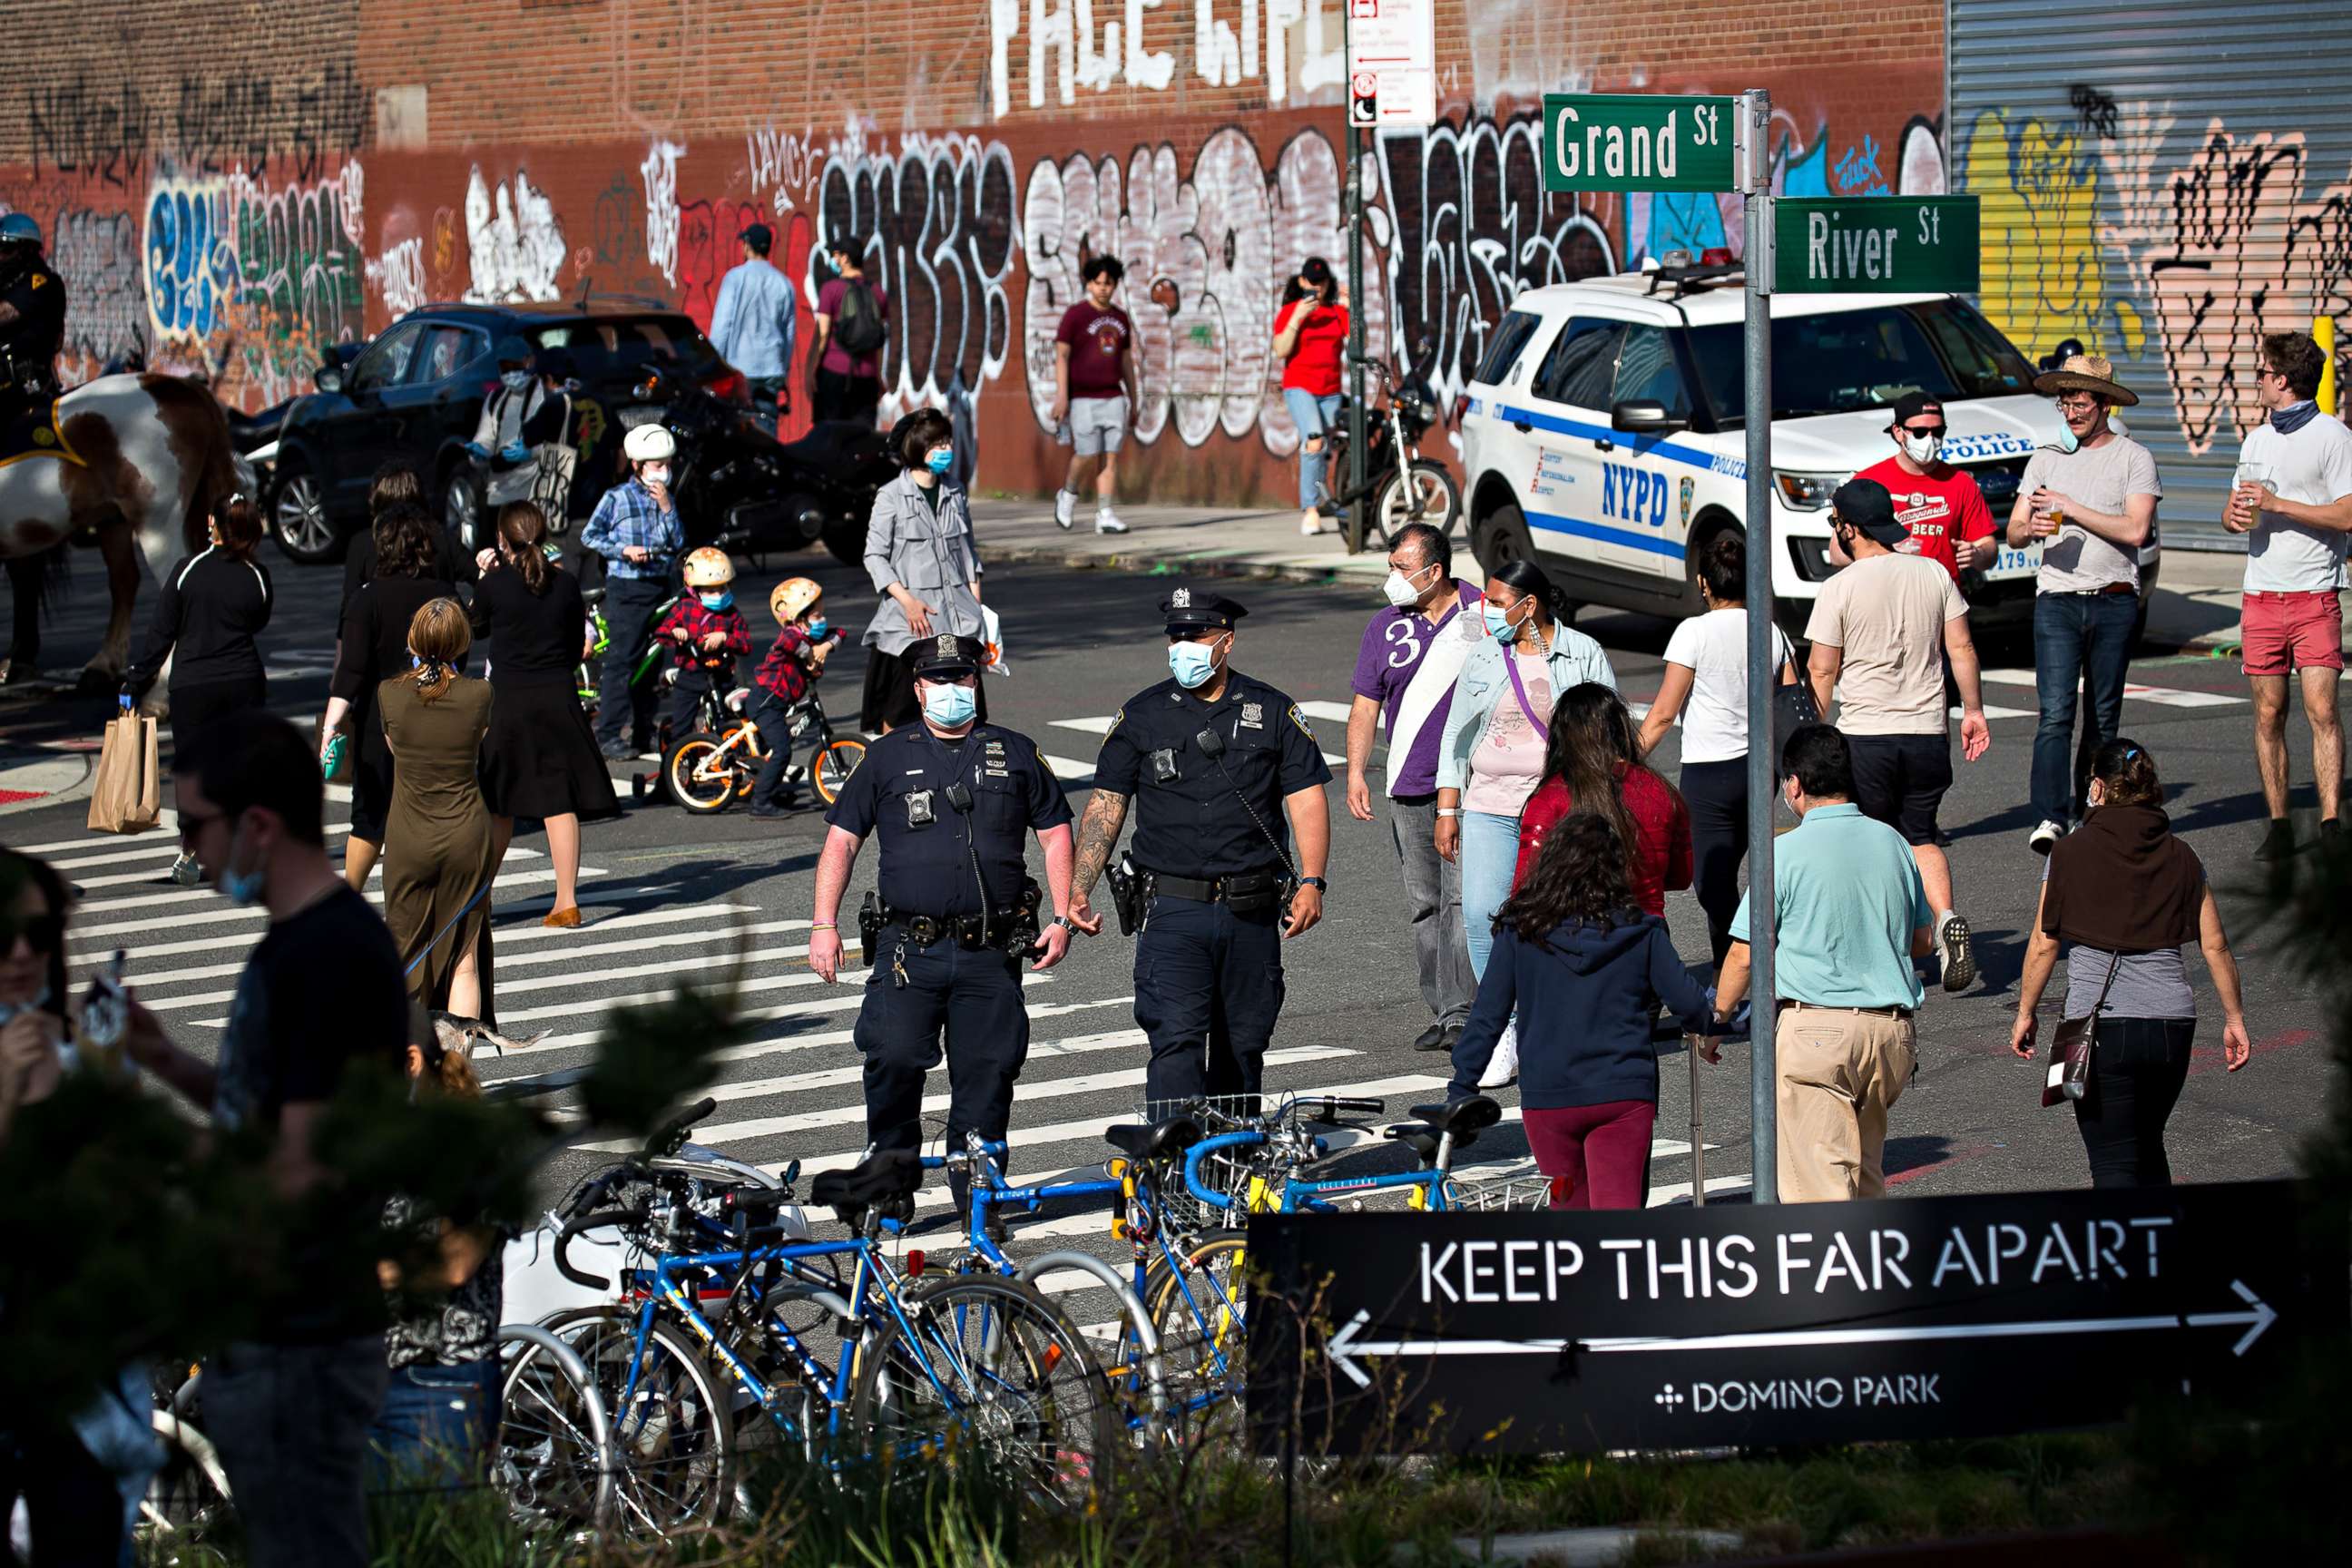 PHOTO: Police officers patrol near a social distancing sign in front of Domino Park during the coronavirus pandemic in the Brooklyn borough of New York City, May 3, 2020.